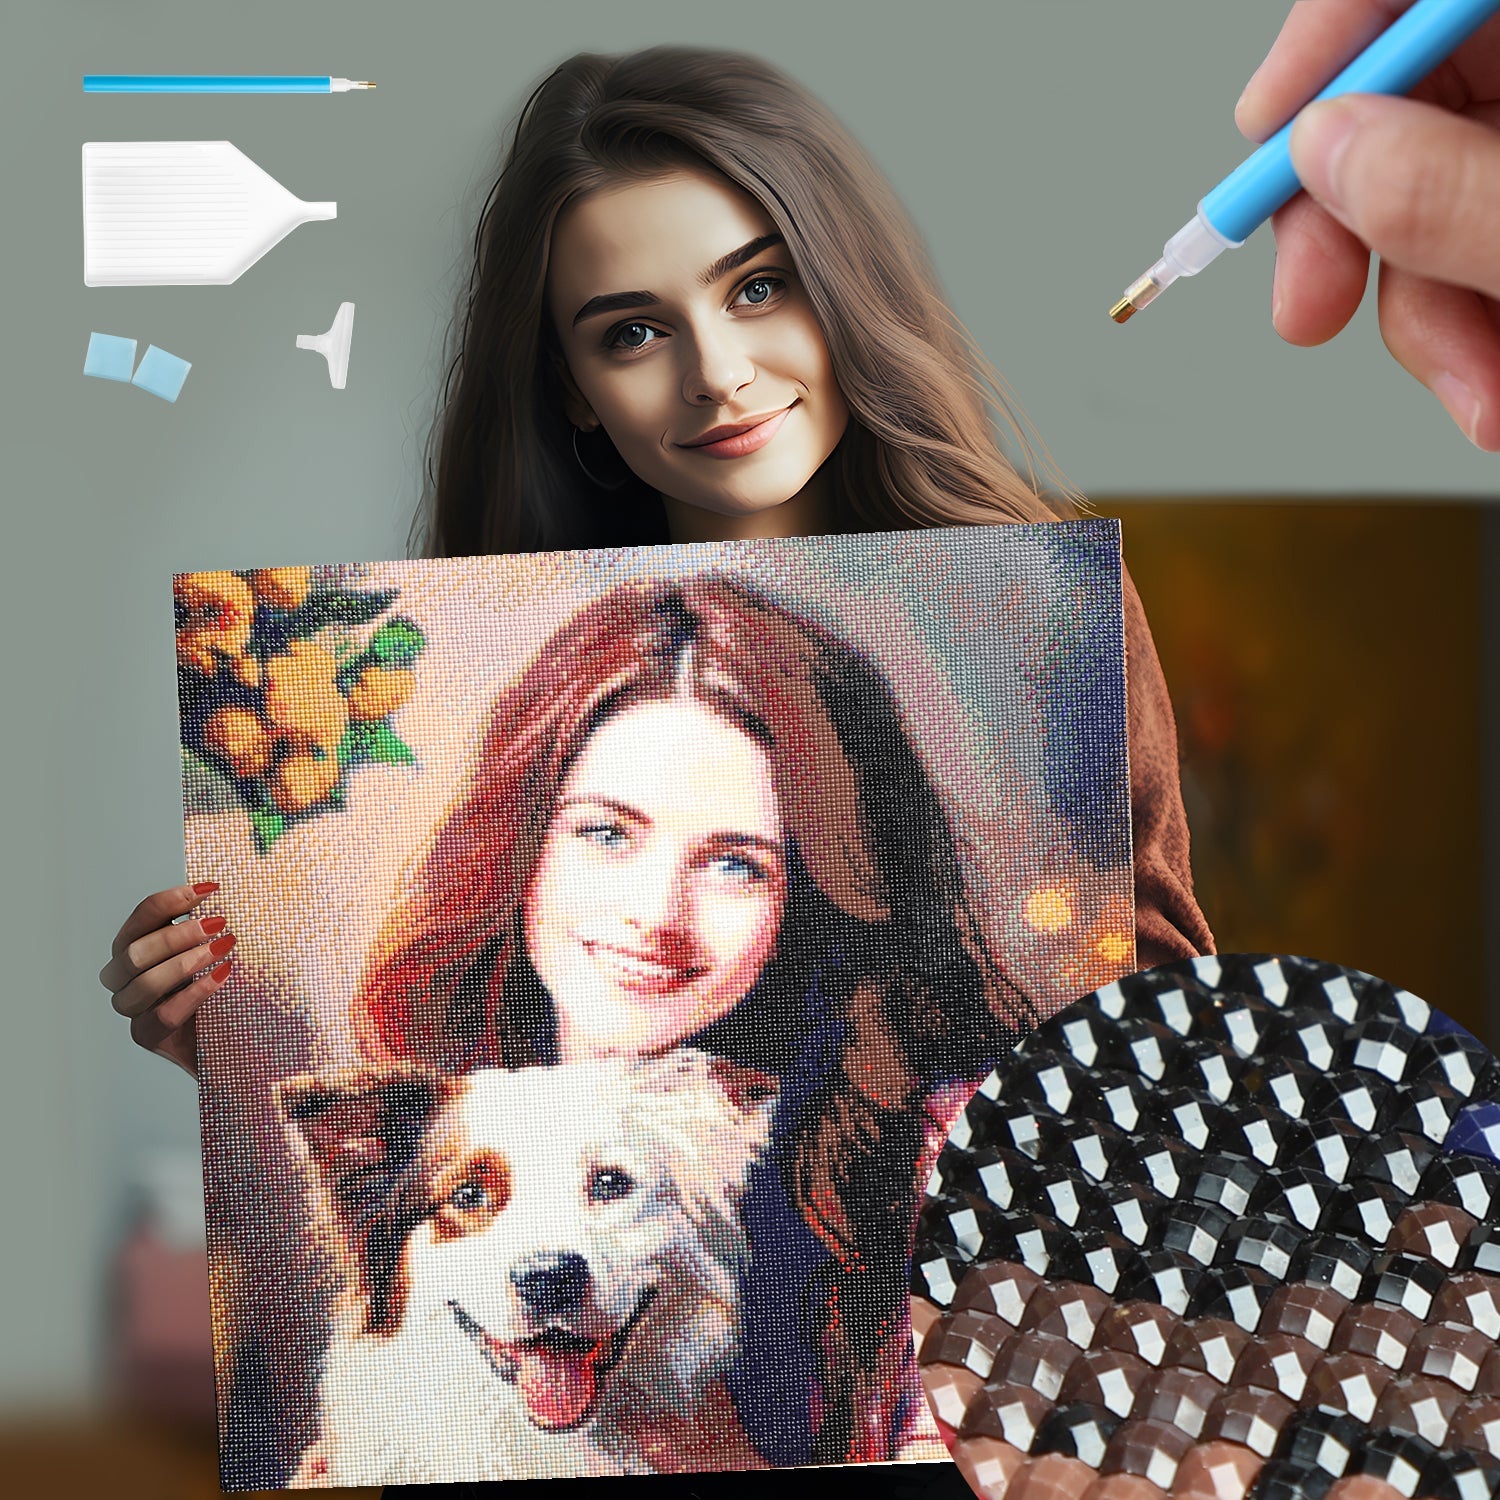  Custom Diamond Painting Kits Full Drill for Adults,  Personalized Photo Customized Diamond Painting, Private Custom Your Own  Picture (Round Drill, 11.7x11.7inch/30x30cm)